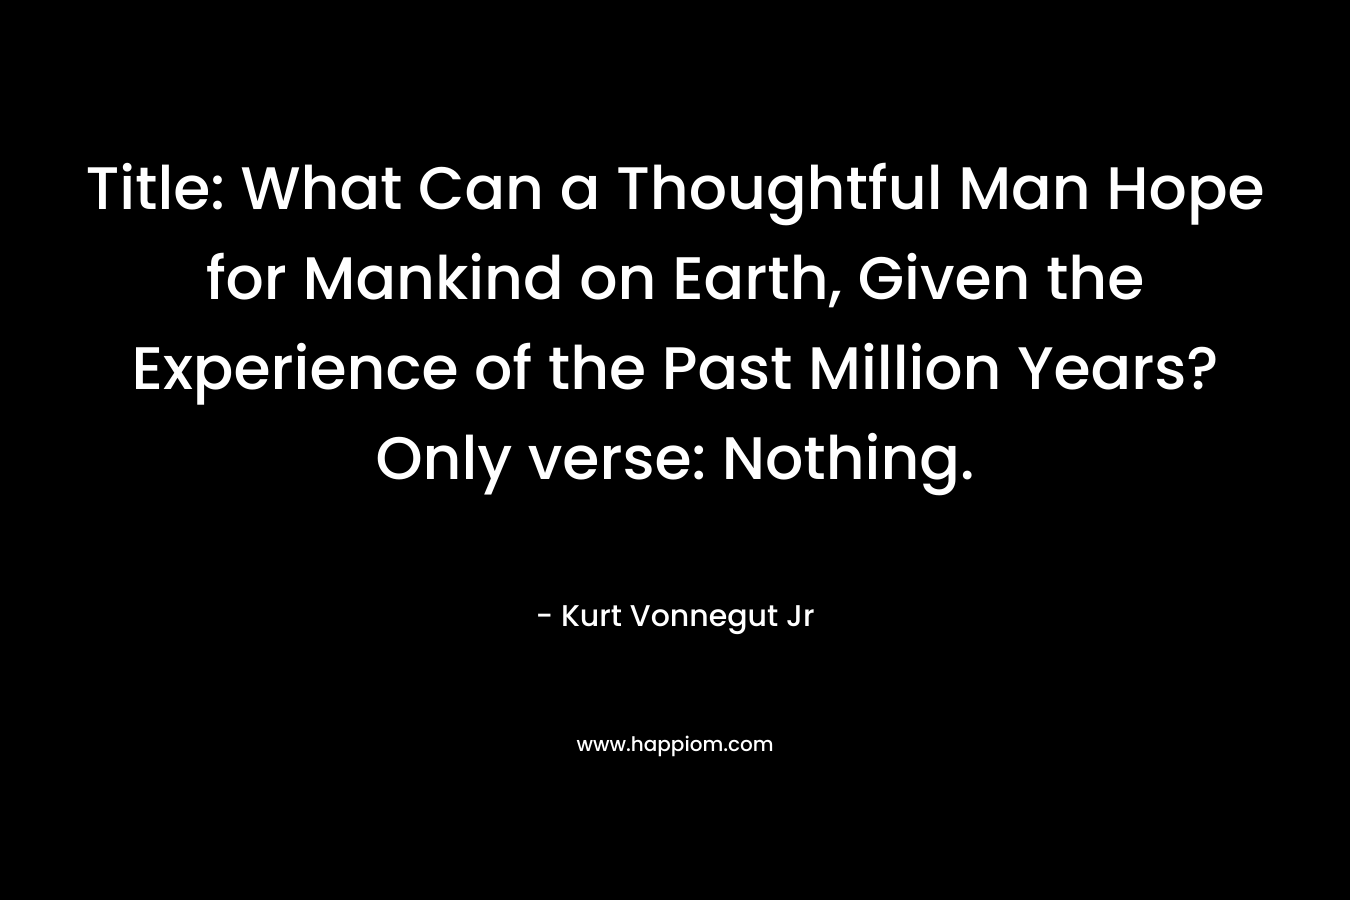 Title: What Can a Thoughtful Man Hope for Mankind on Earth, Given the Experience of the Past Million Years? Only verse: Nothing.